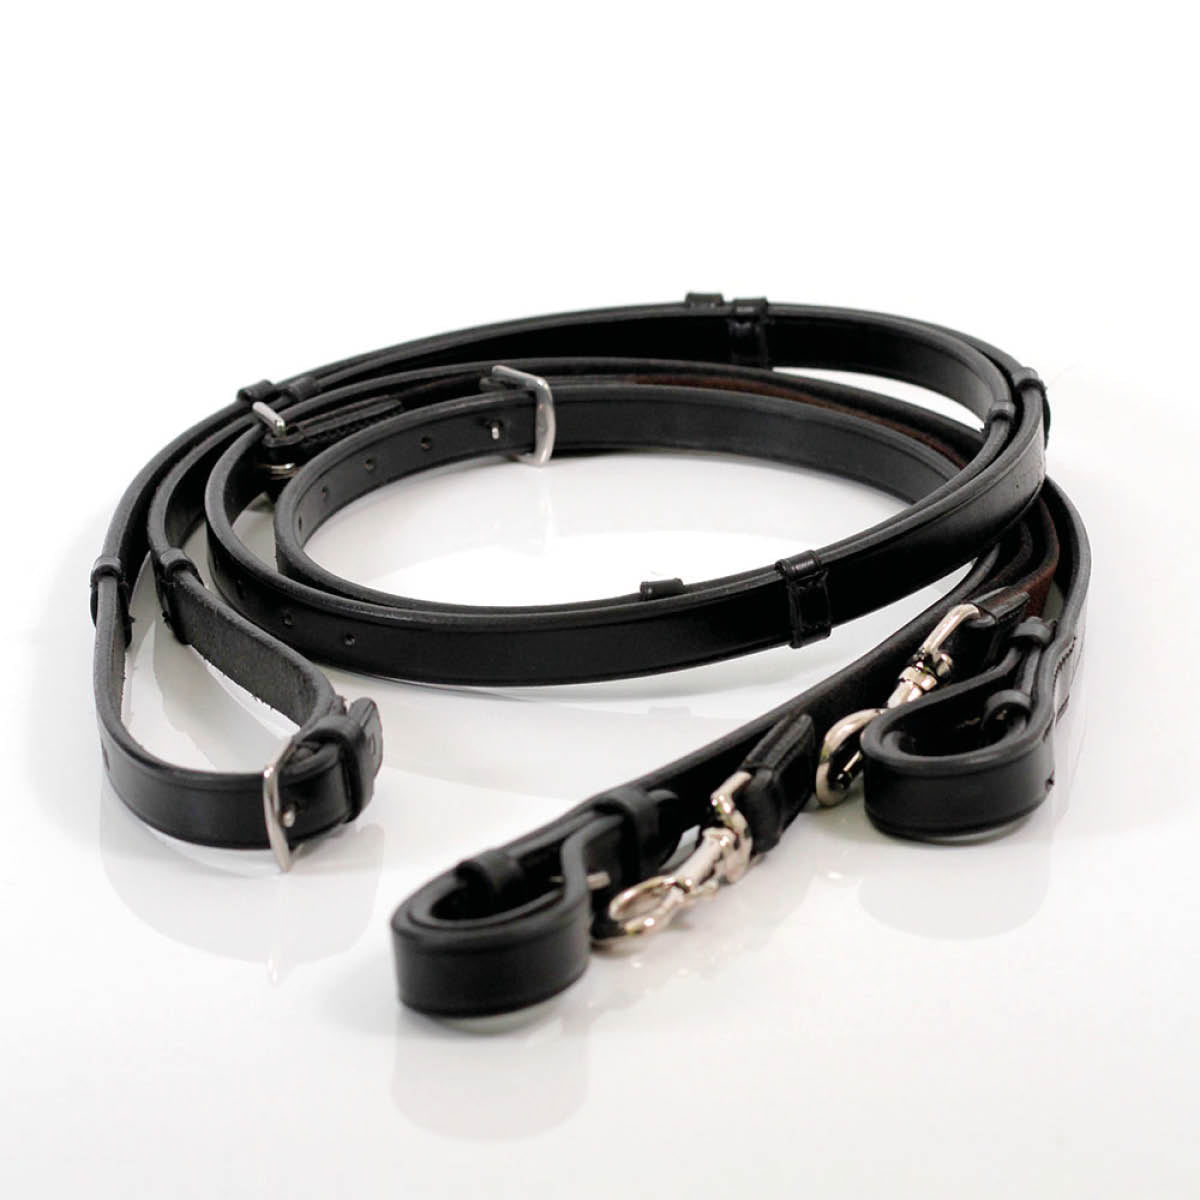 Notched Leather Reins - Balanced Support Reins